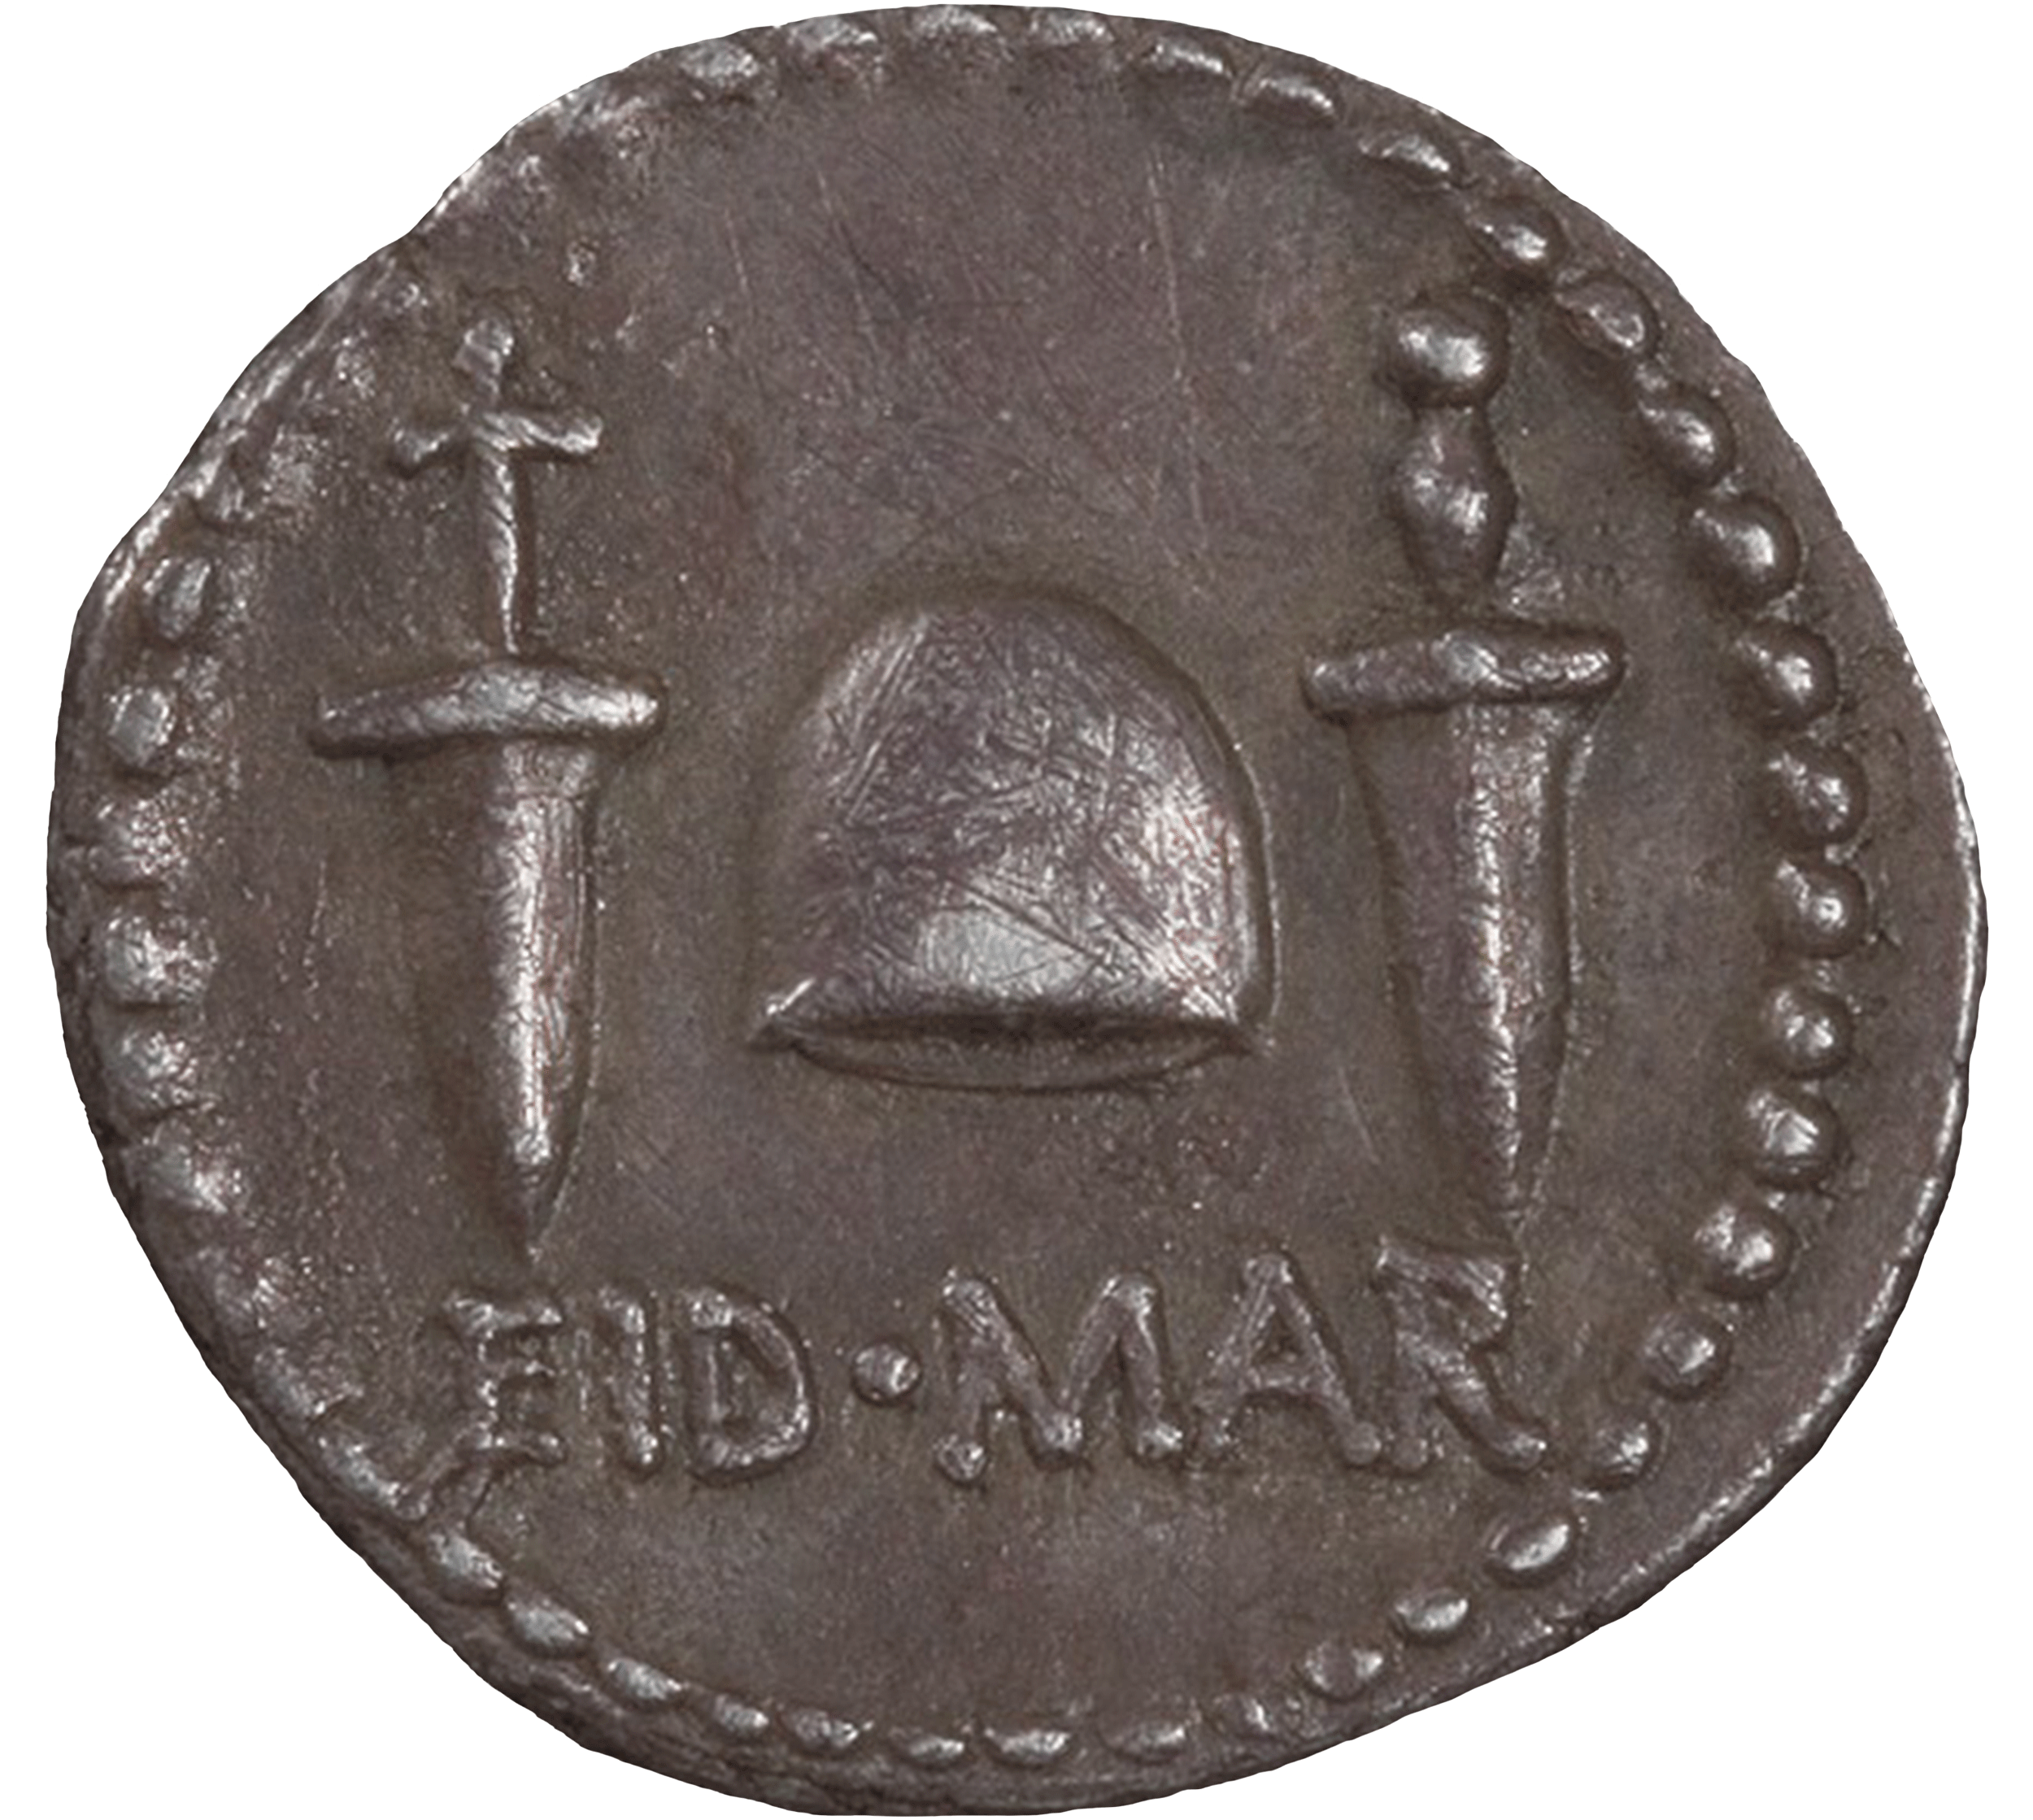 Coin with daggers